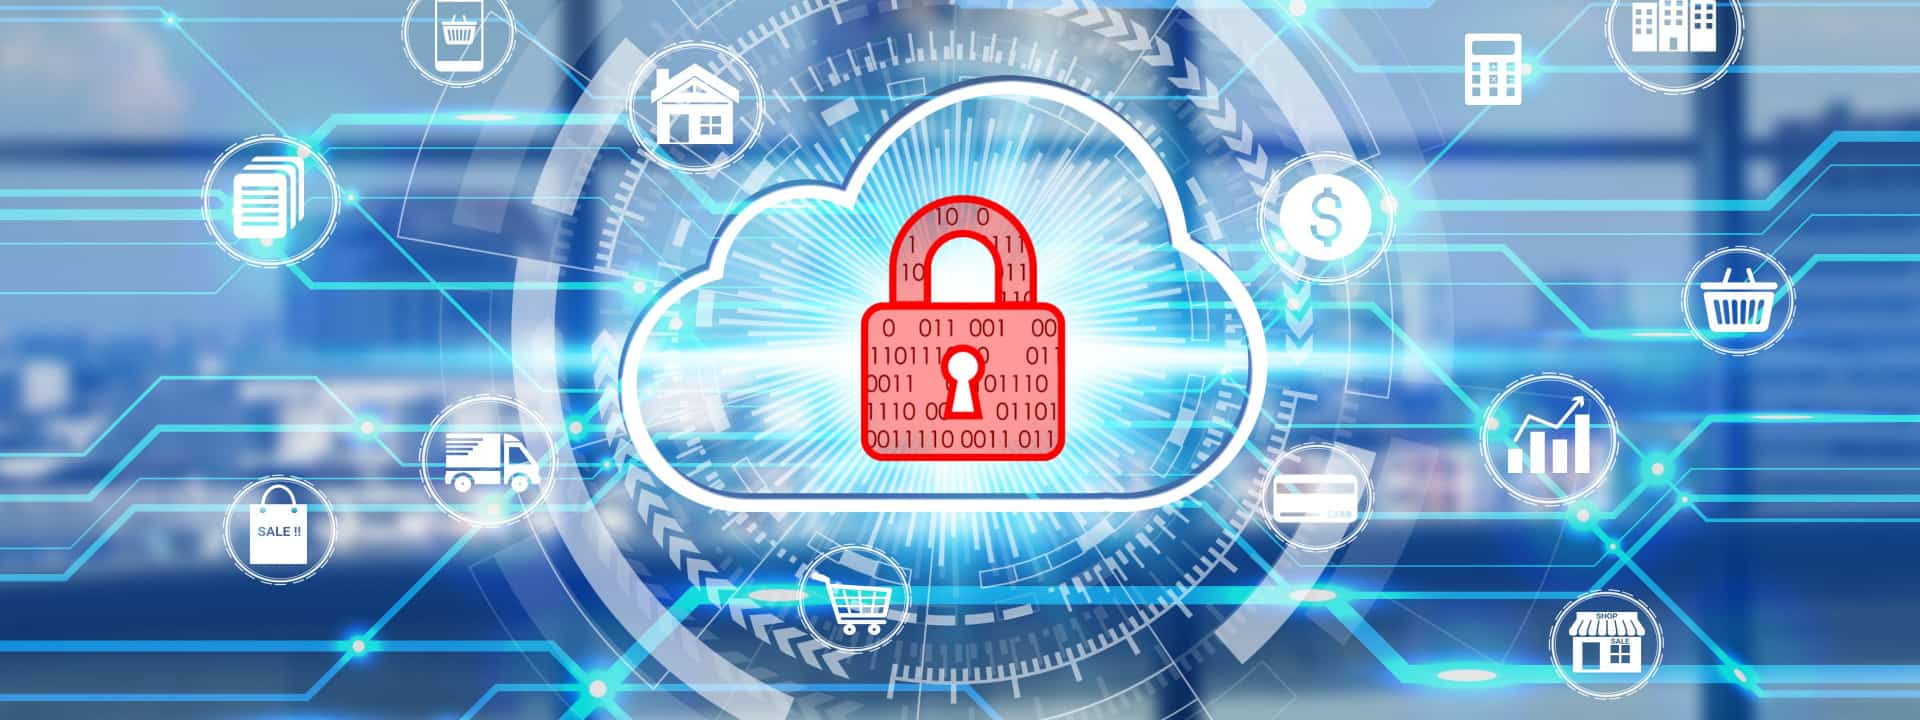 Digital depiction of cyber security with a padlock and cloud server symbol